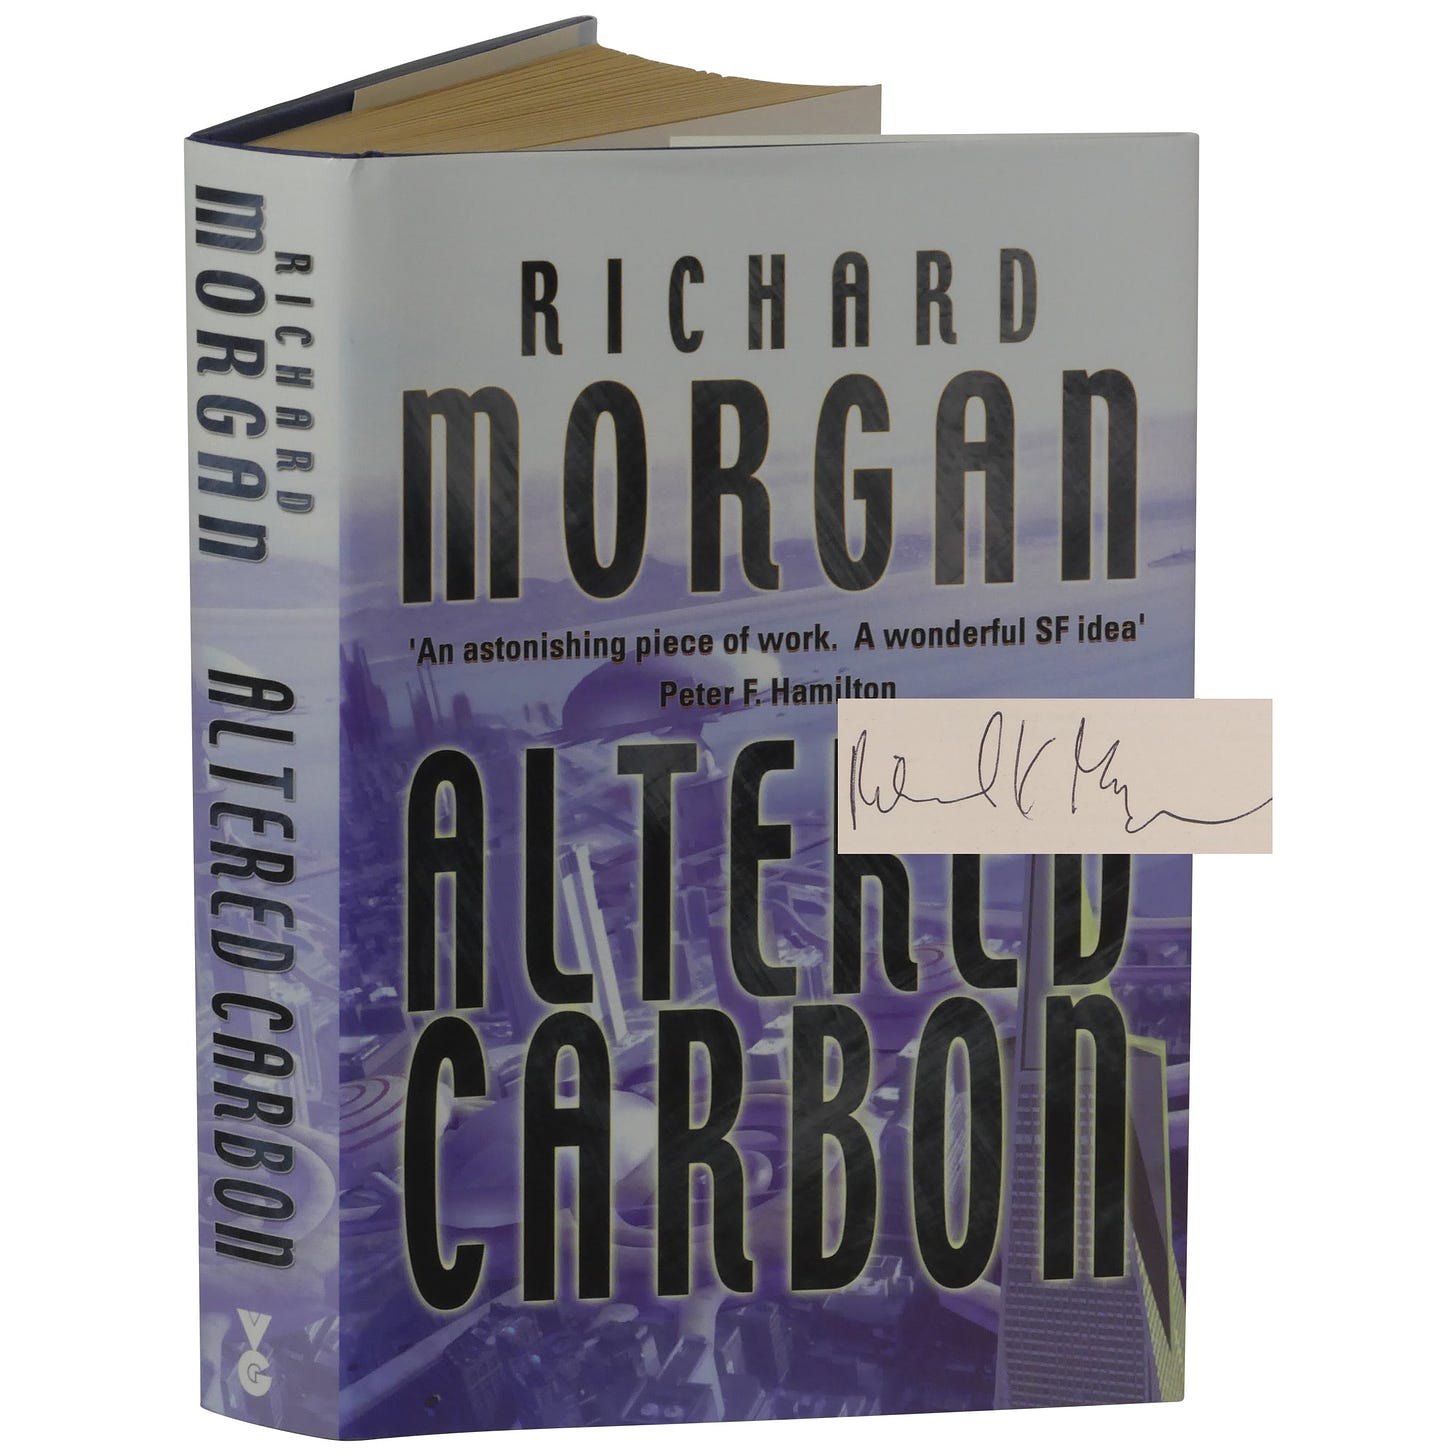 First edition of Richard Morgan's Altered Carbon